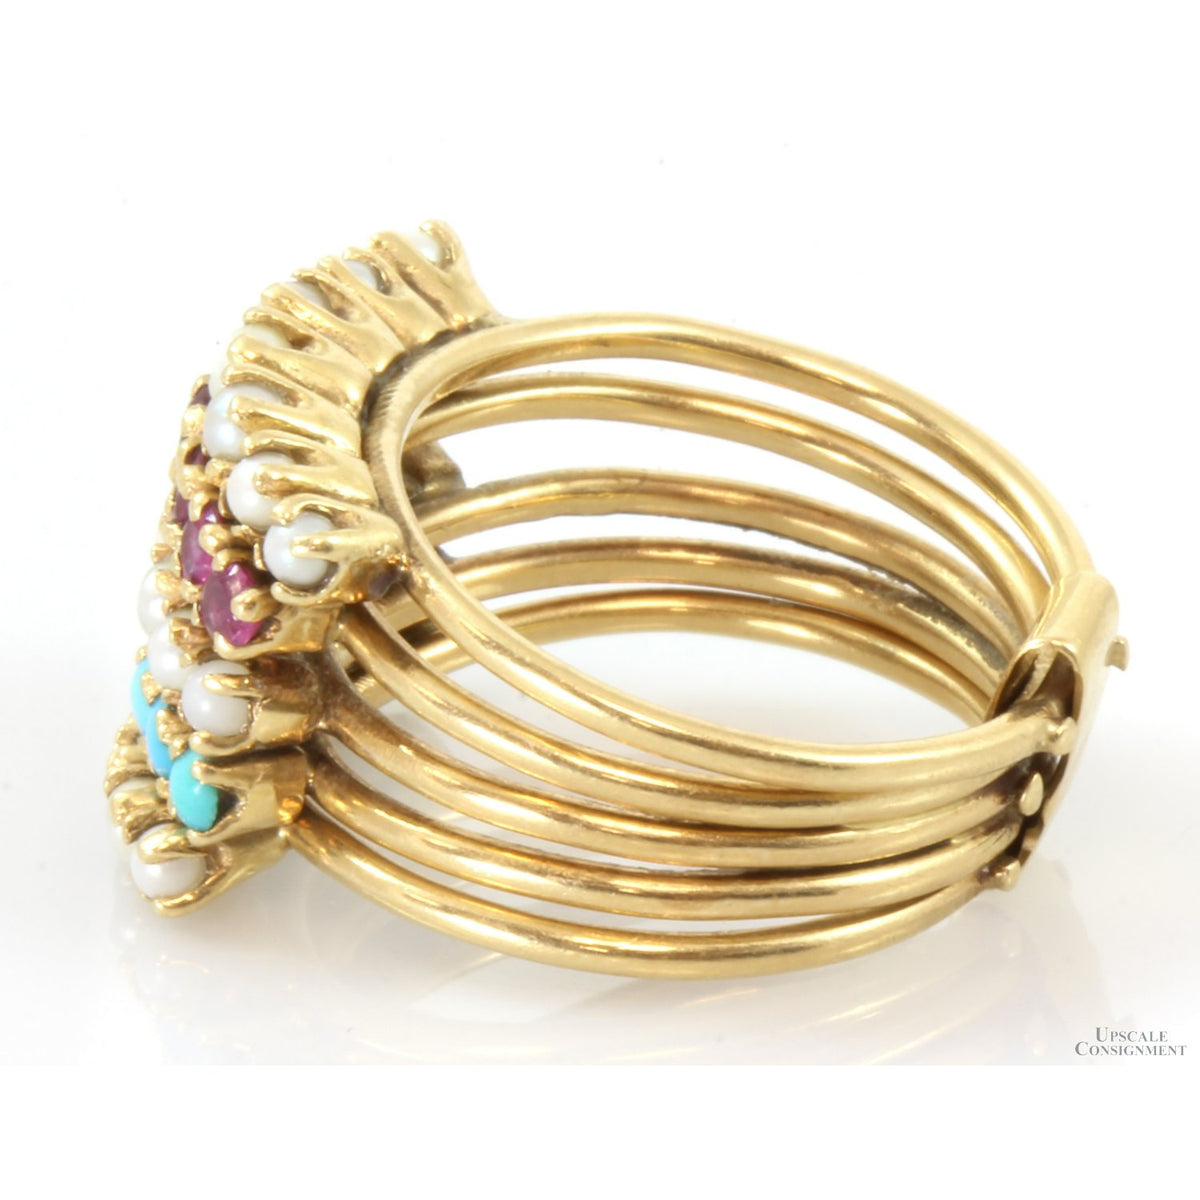 14K Gold Pearl, Ruby,Turquoise Princess Harem Stacking Bands